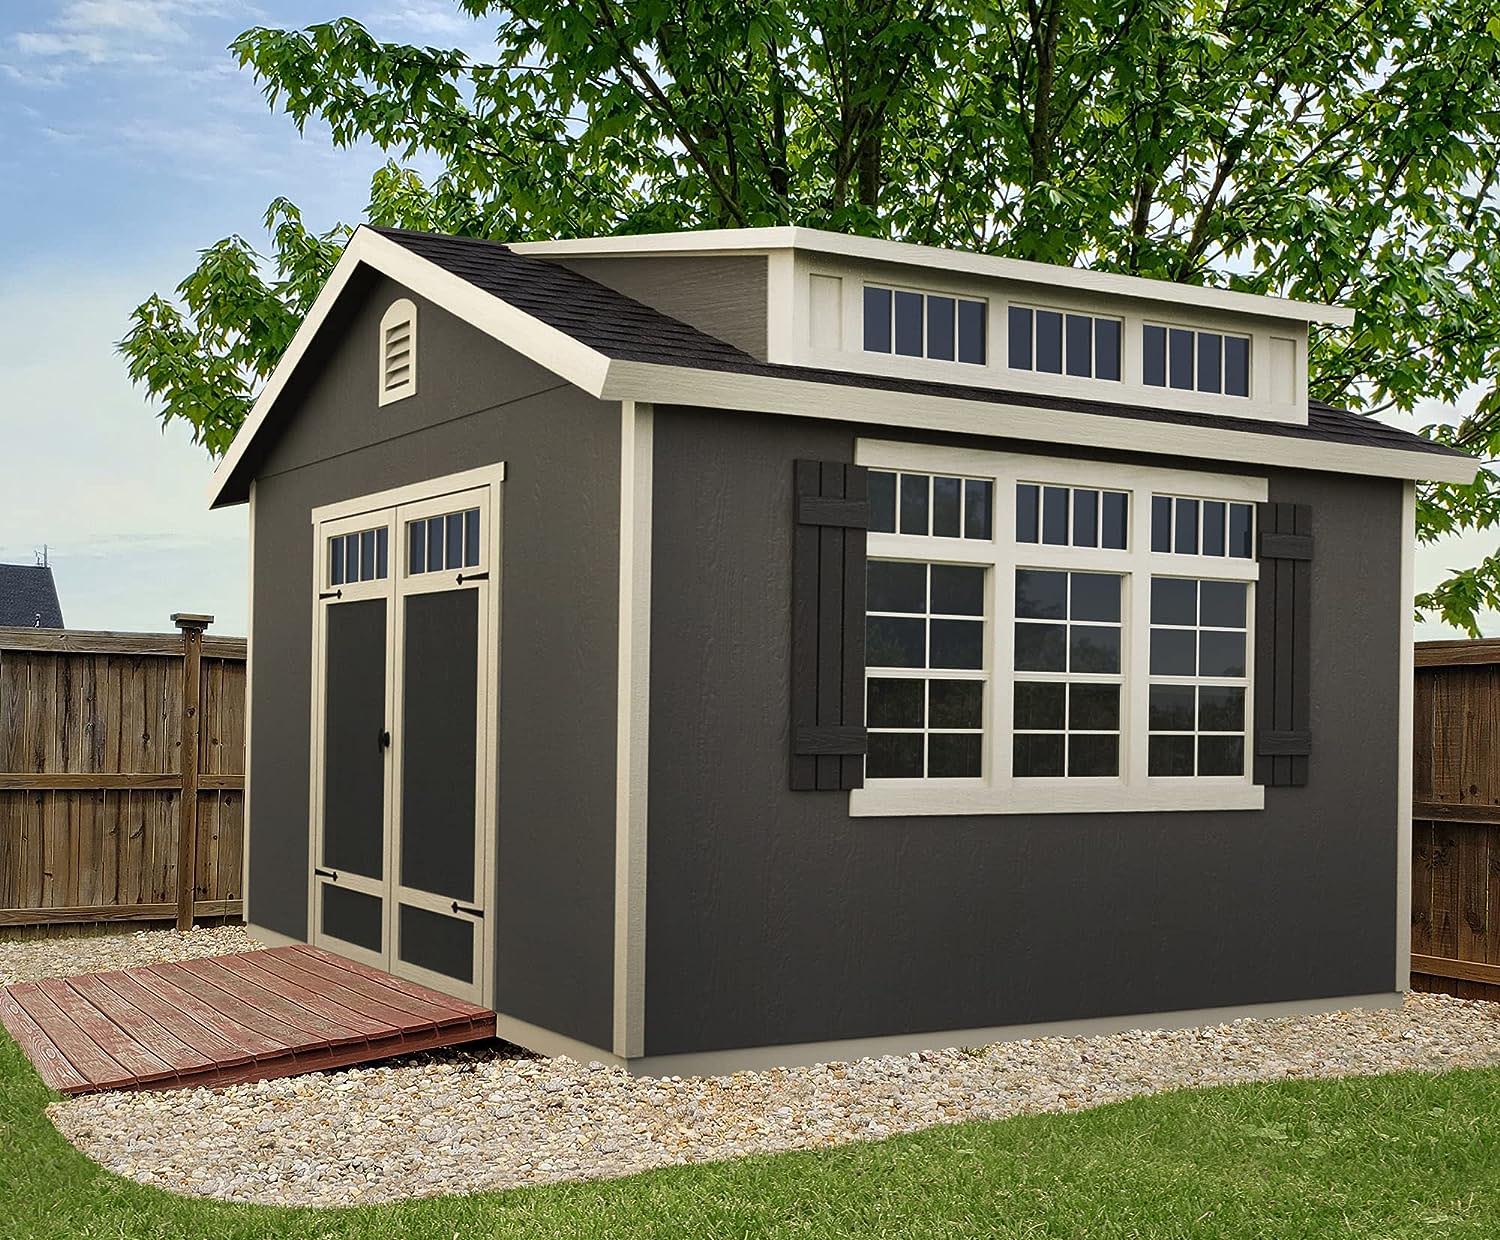 Kit Homes You Can Actually Buy on Amazon Option Handy Home Products Windemere Shed